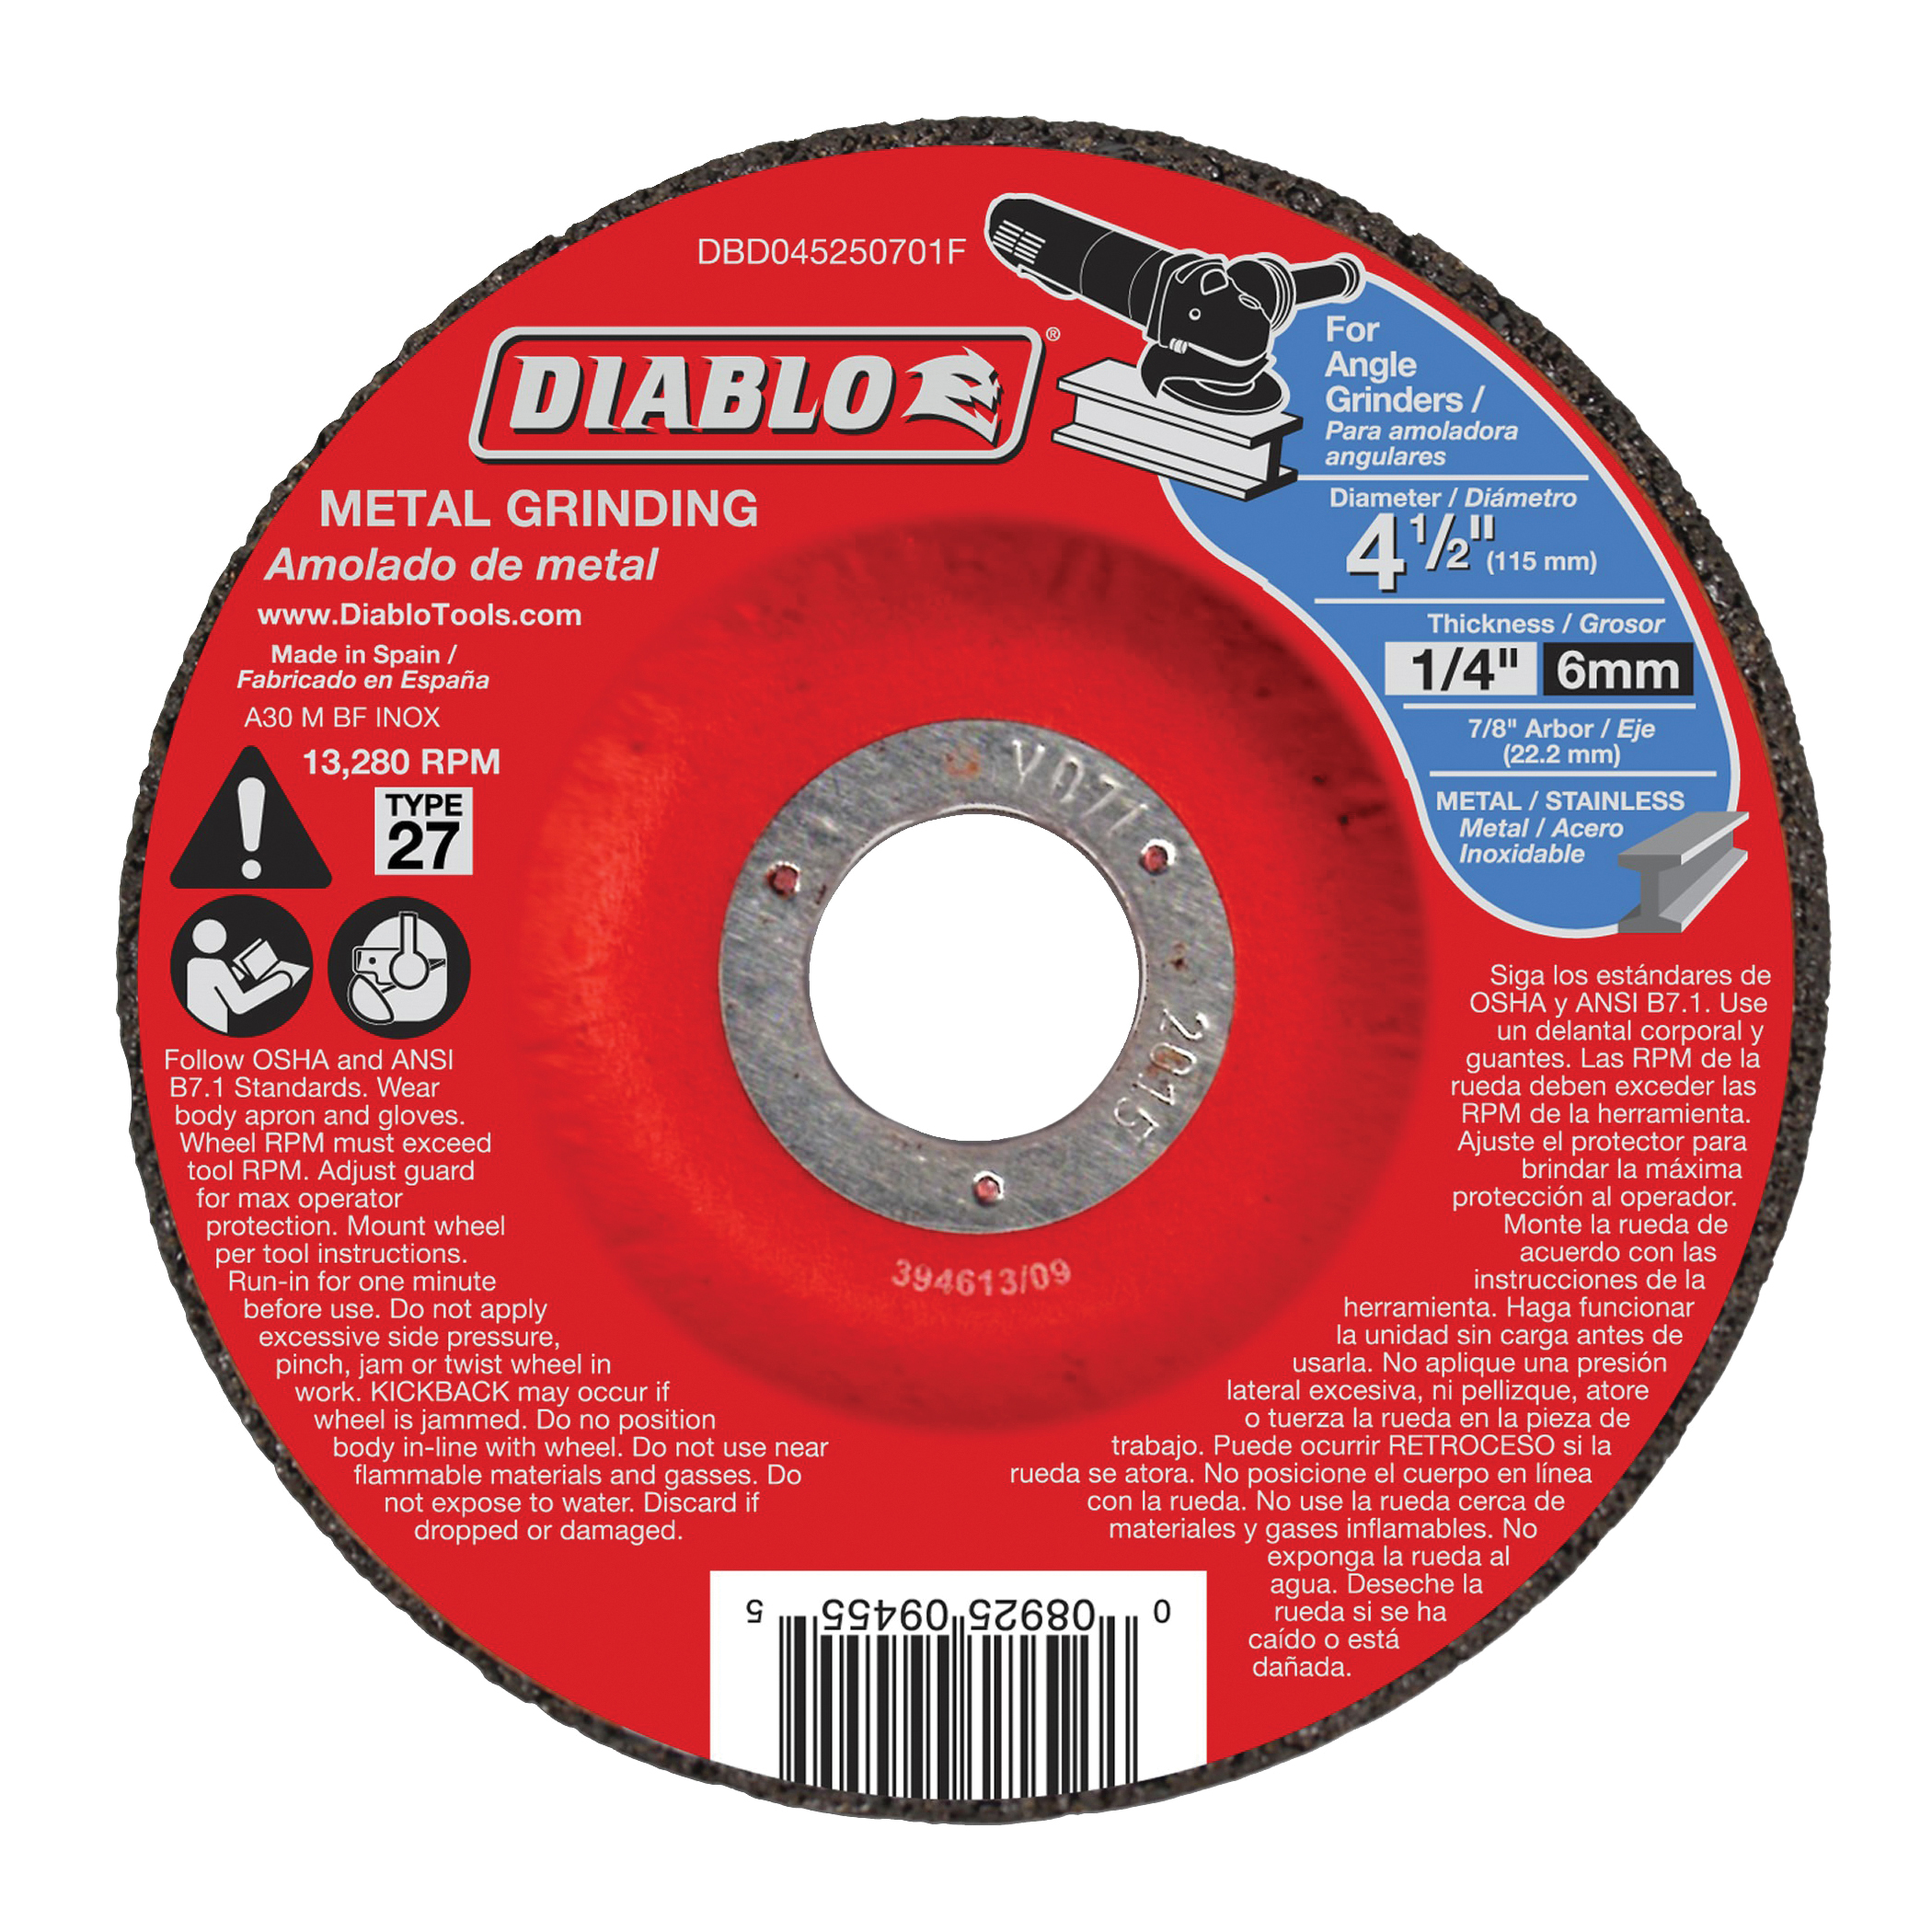 DBD045250701F Grinding Wheel, 4-1/2 in Dia, 1/4 in Thick, 7/8 in Arbor, Aluminum Oxide Abrasive